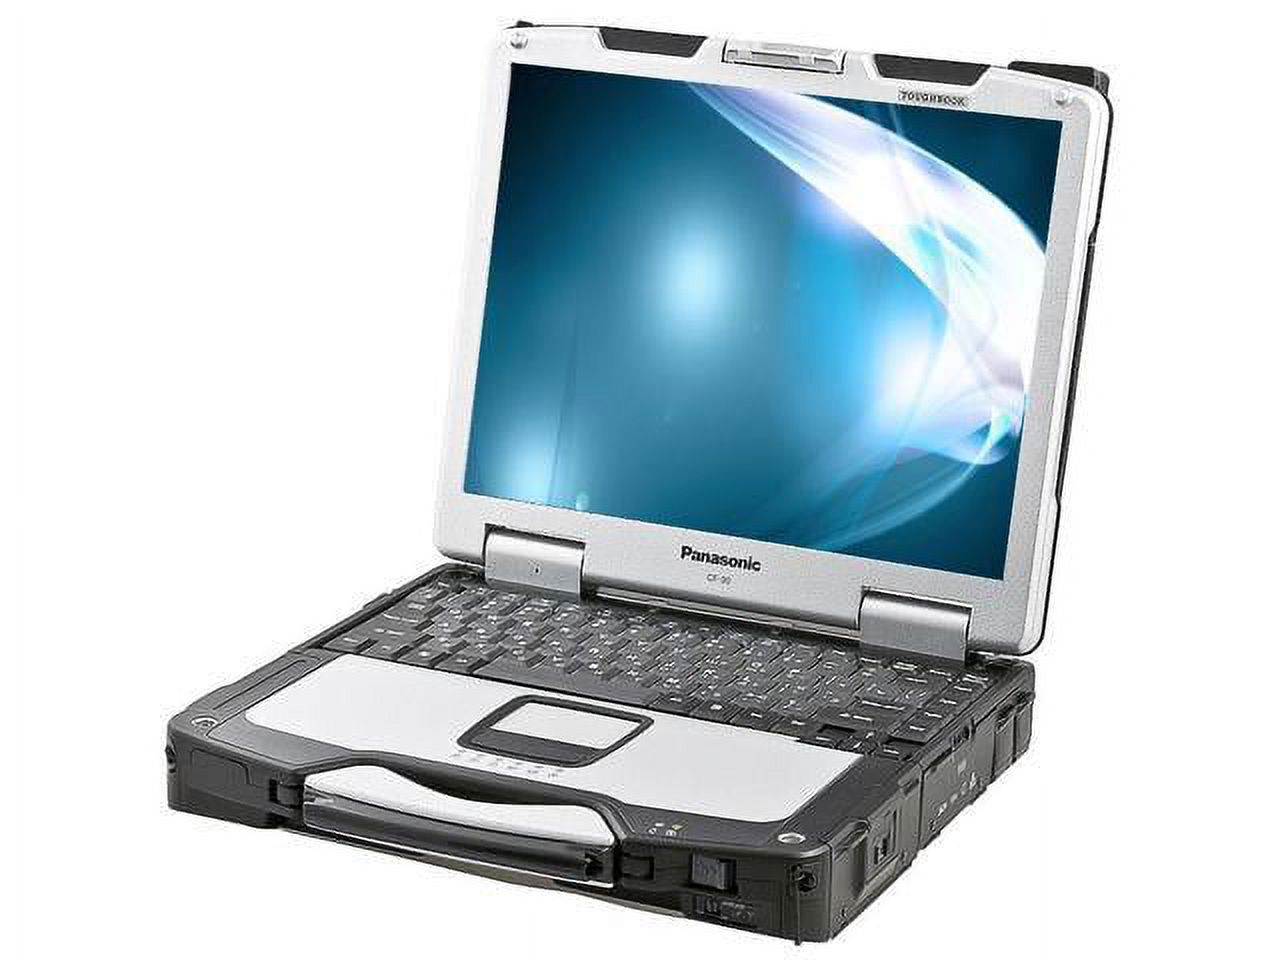 Panasonic ToughBook CF-30 Intel Core Duo 1600 MHz 80GB HDD 3072mb 13.0â€ù WideScreen LCD Windows 7 Pro 32 Bit -USED with FREE 3 Year Warranty provided by CPS. - image 1 of 2